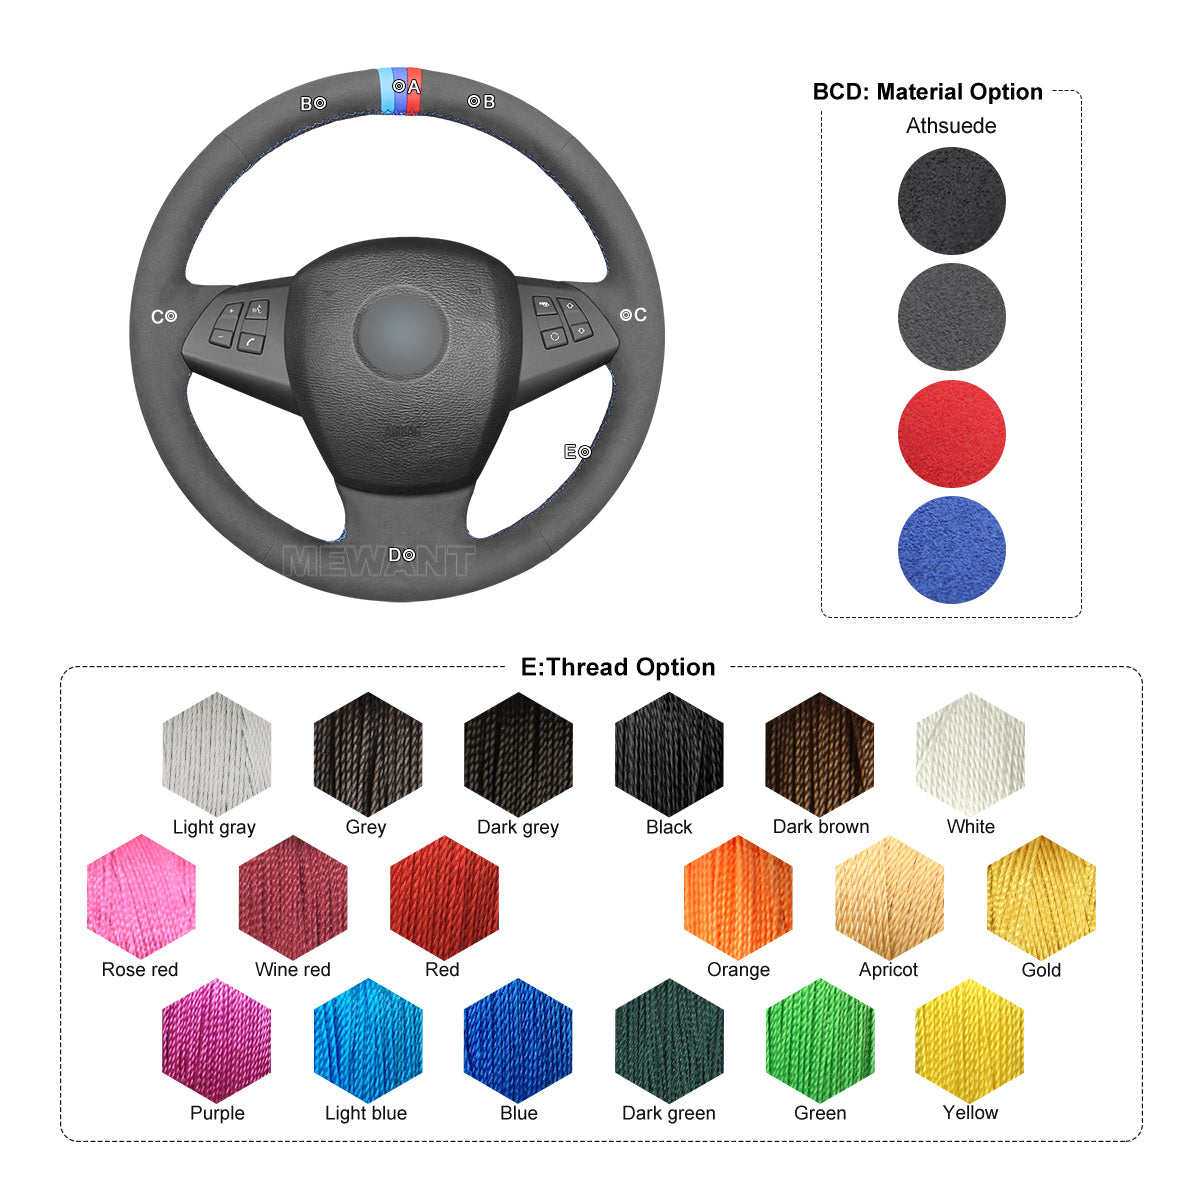 MEWANT Hand Stitch Car Steering Wheel Cover for BMW X5 E70 2007-2013